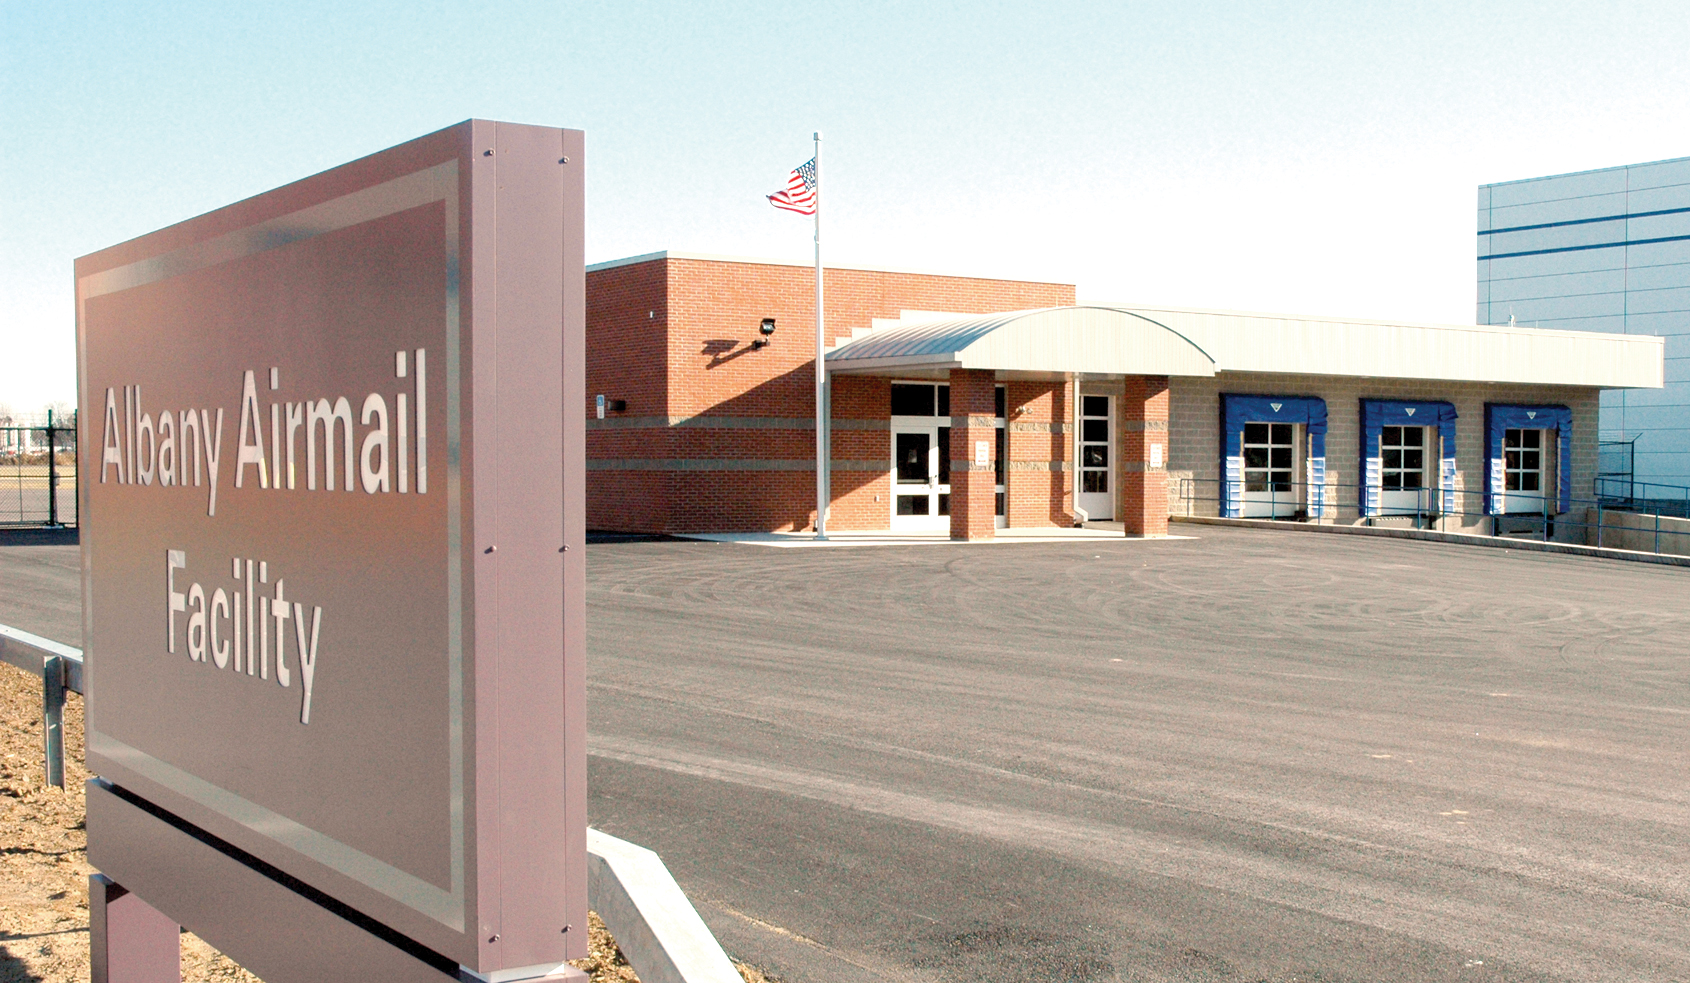 Albany Grows Aircraft Parking Capacity with New Airmail Facility